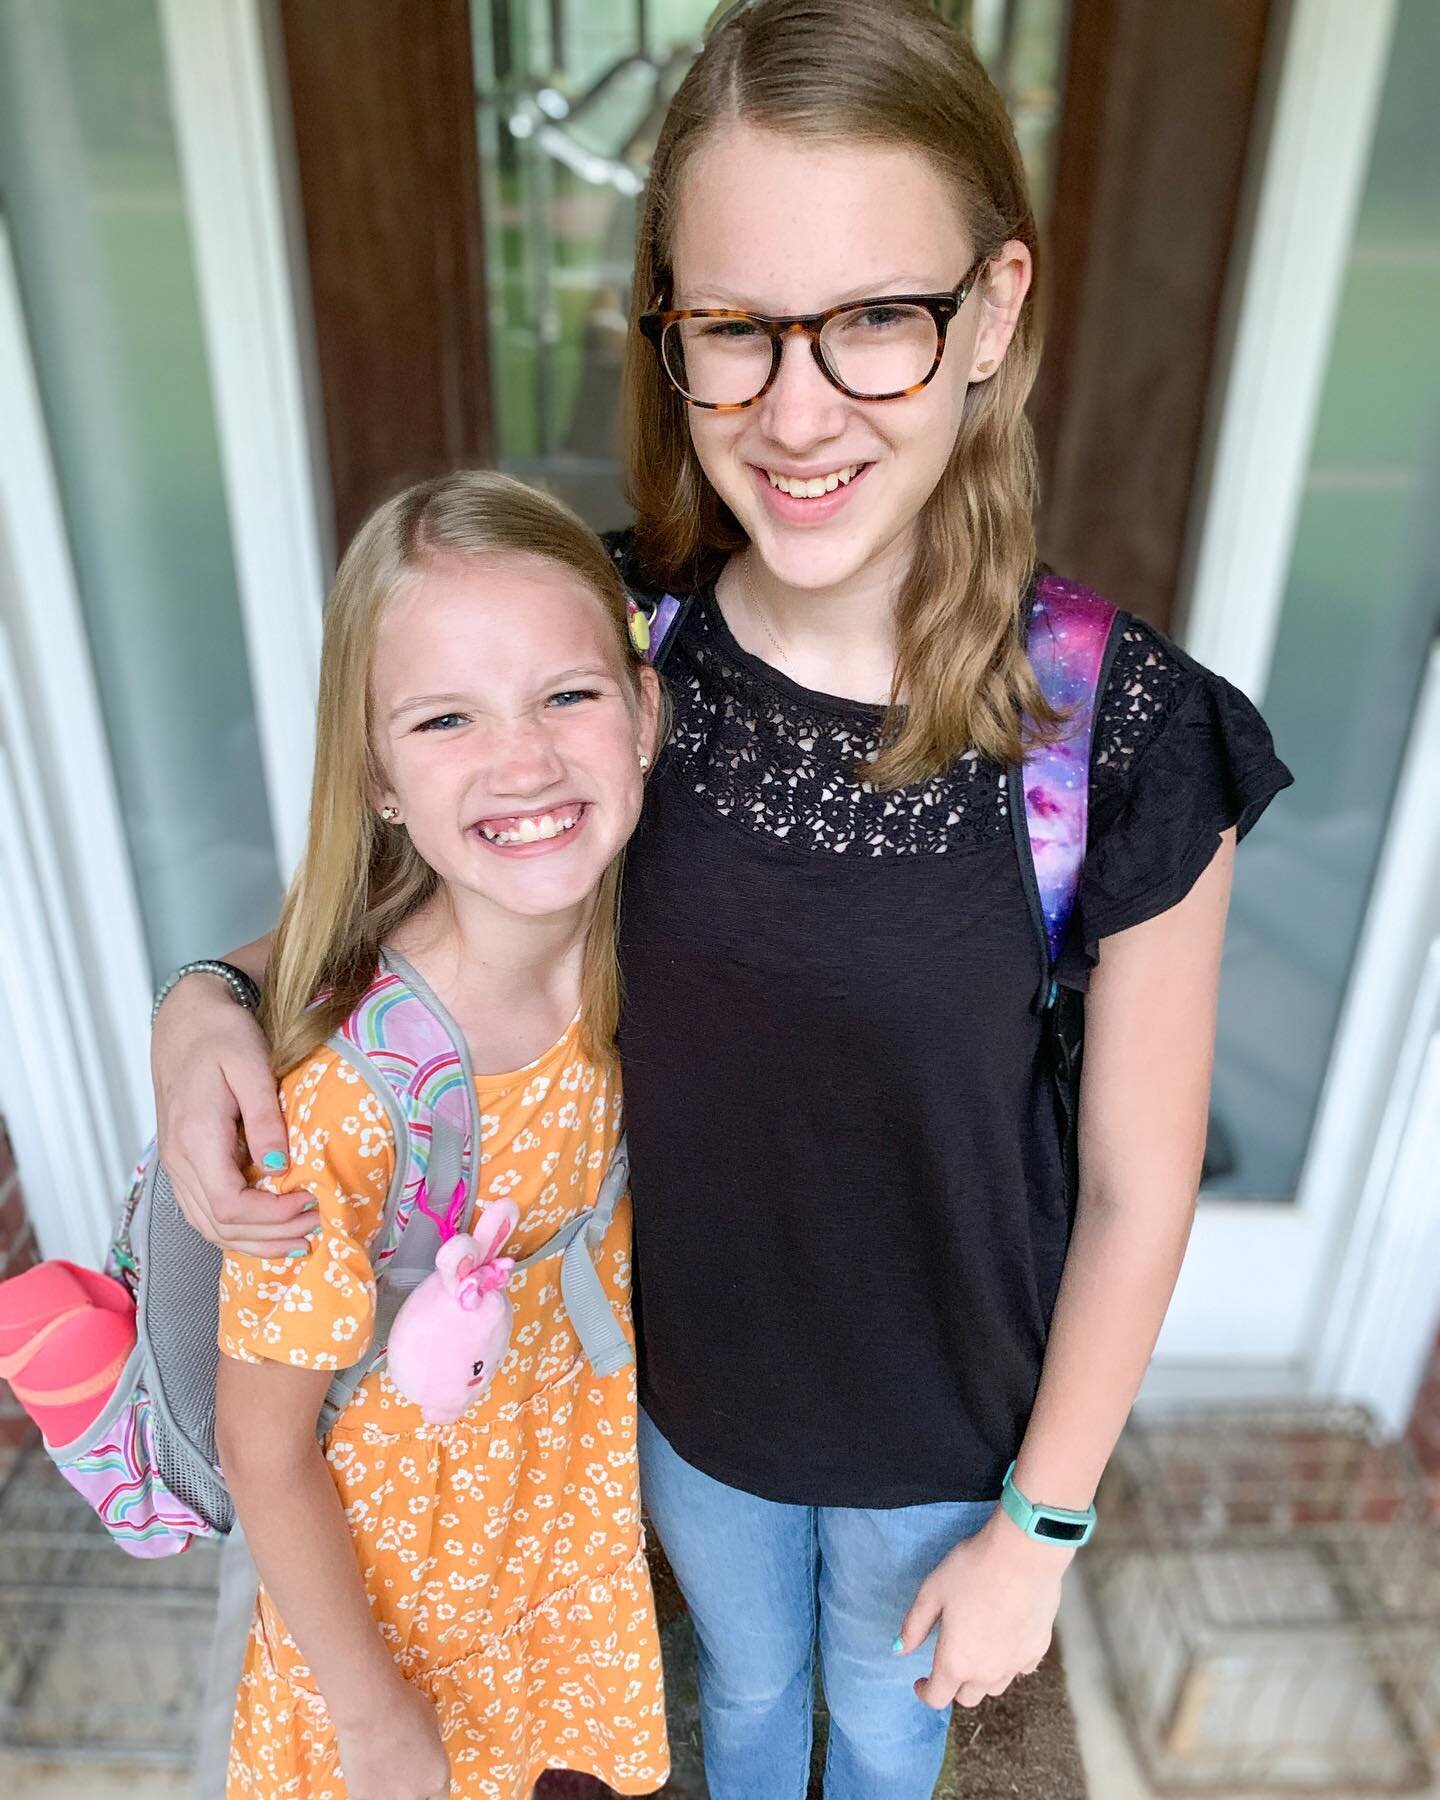 Here we go! Fifth and seventh grade for these two. ❤️